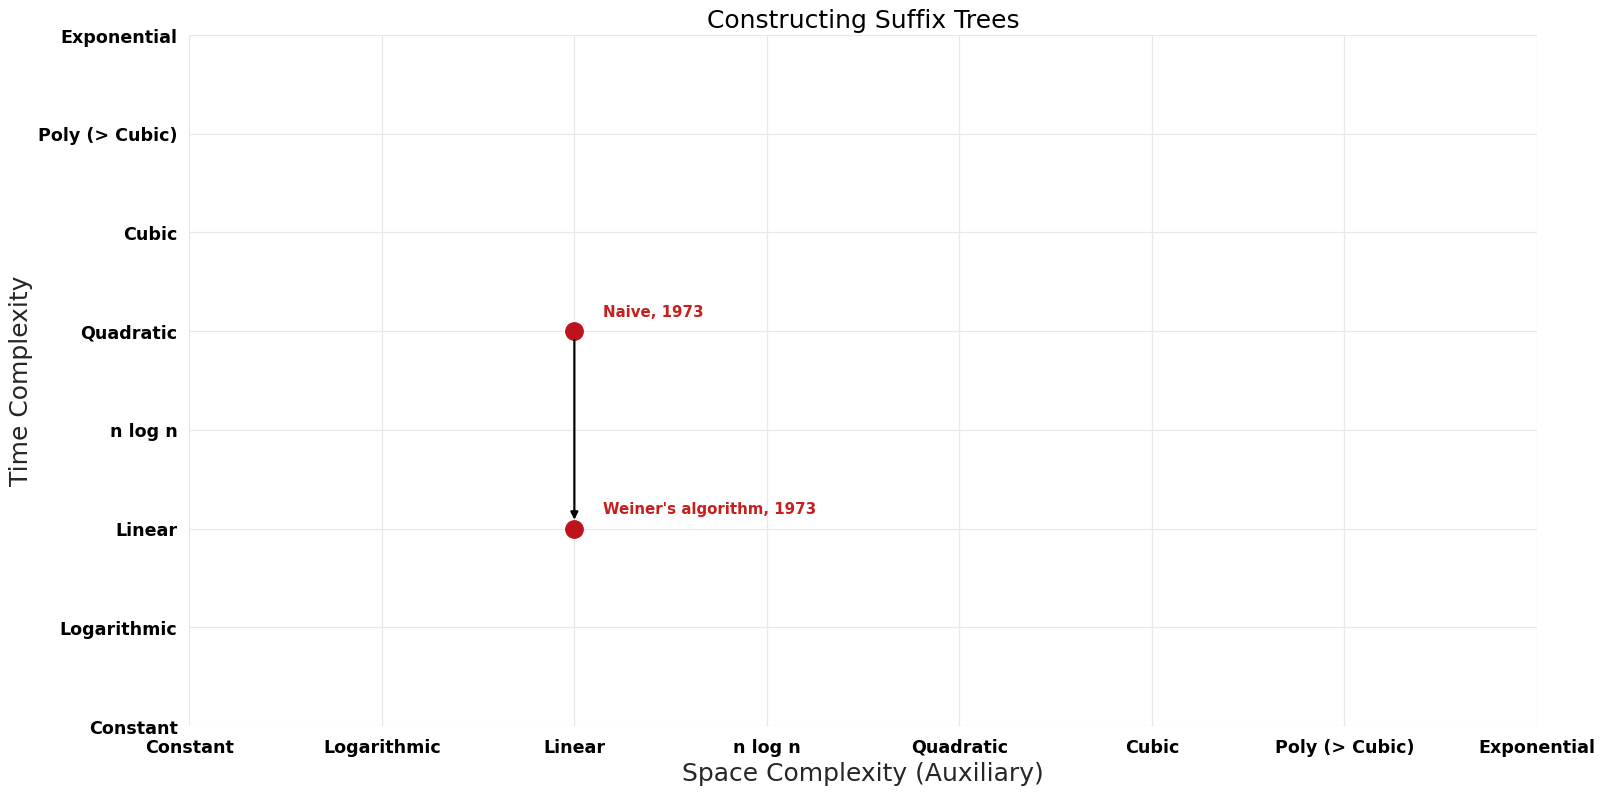 Constructing Suffix Trees - Pareto Frontier.png